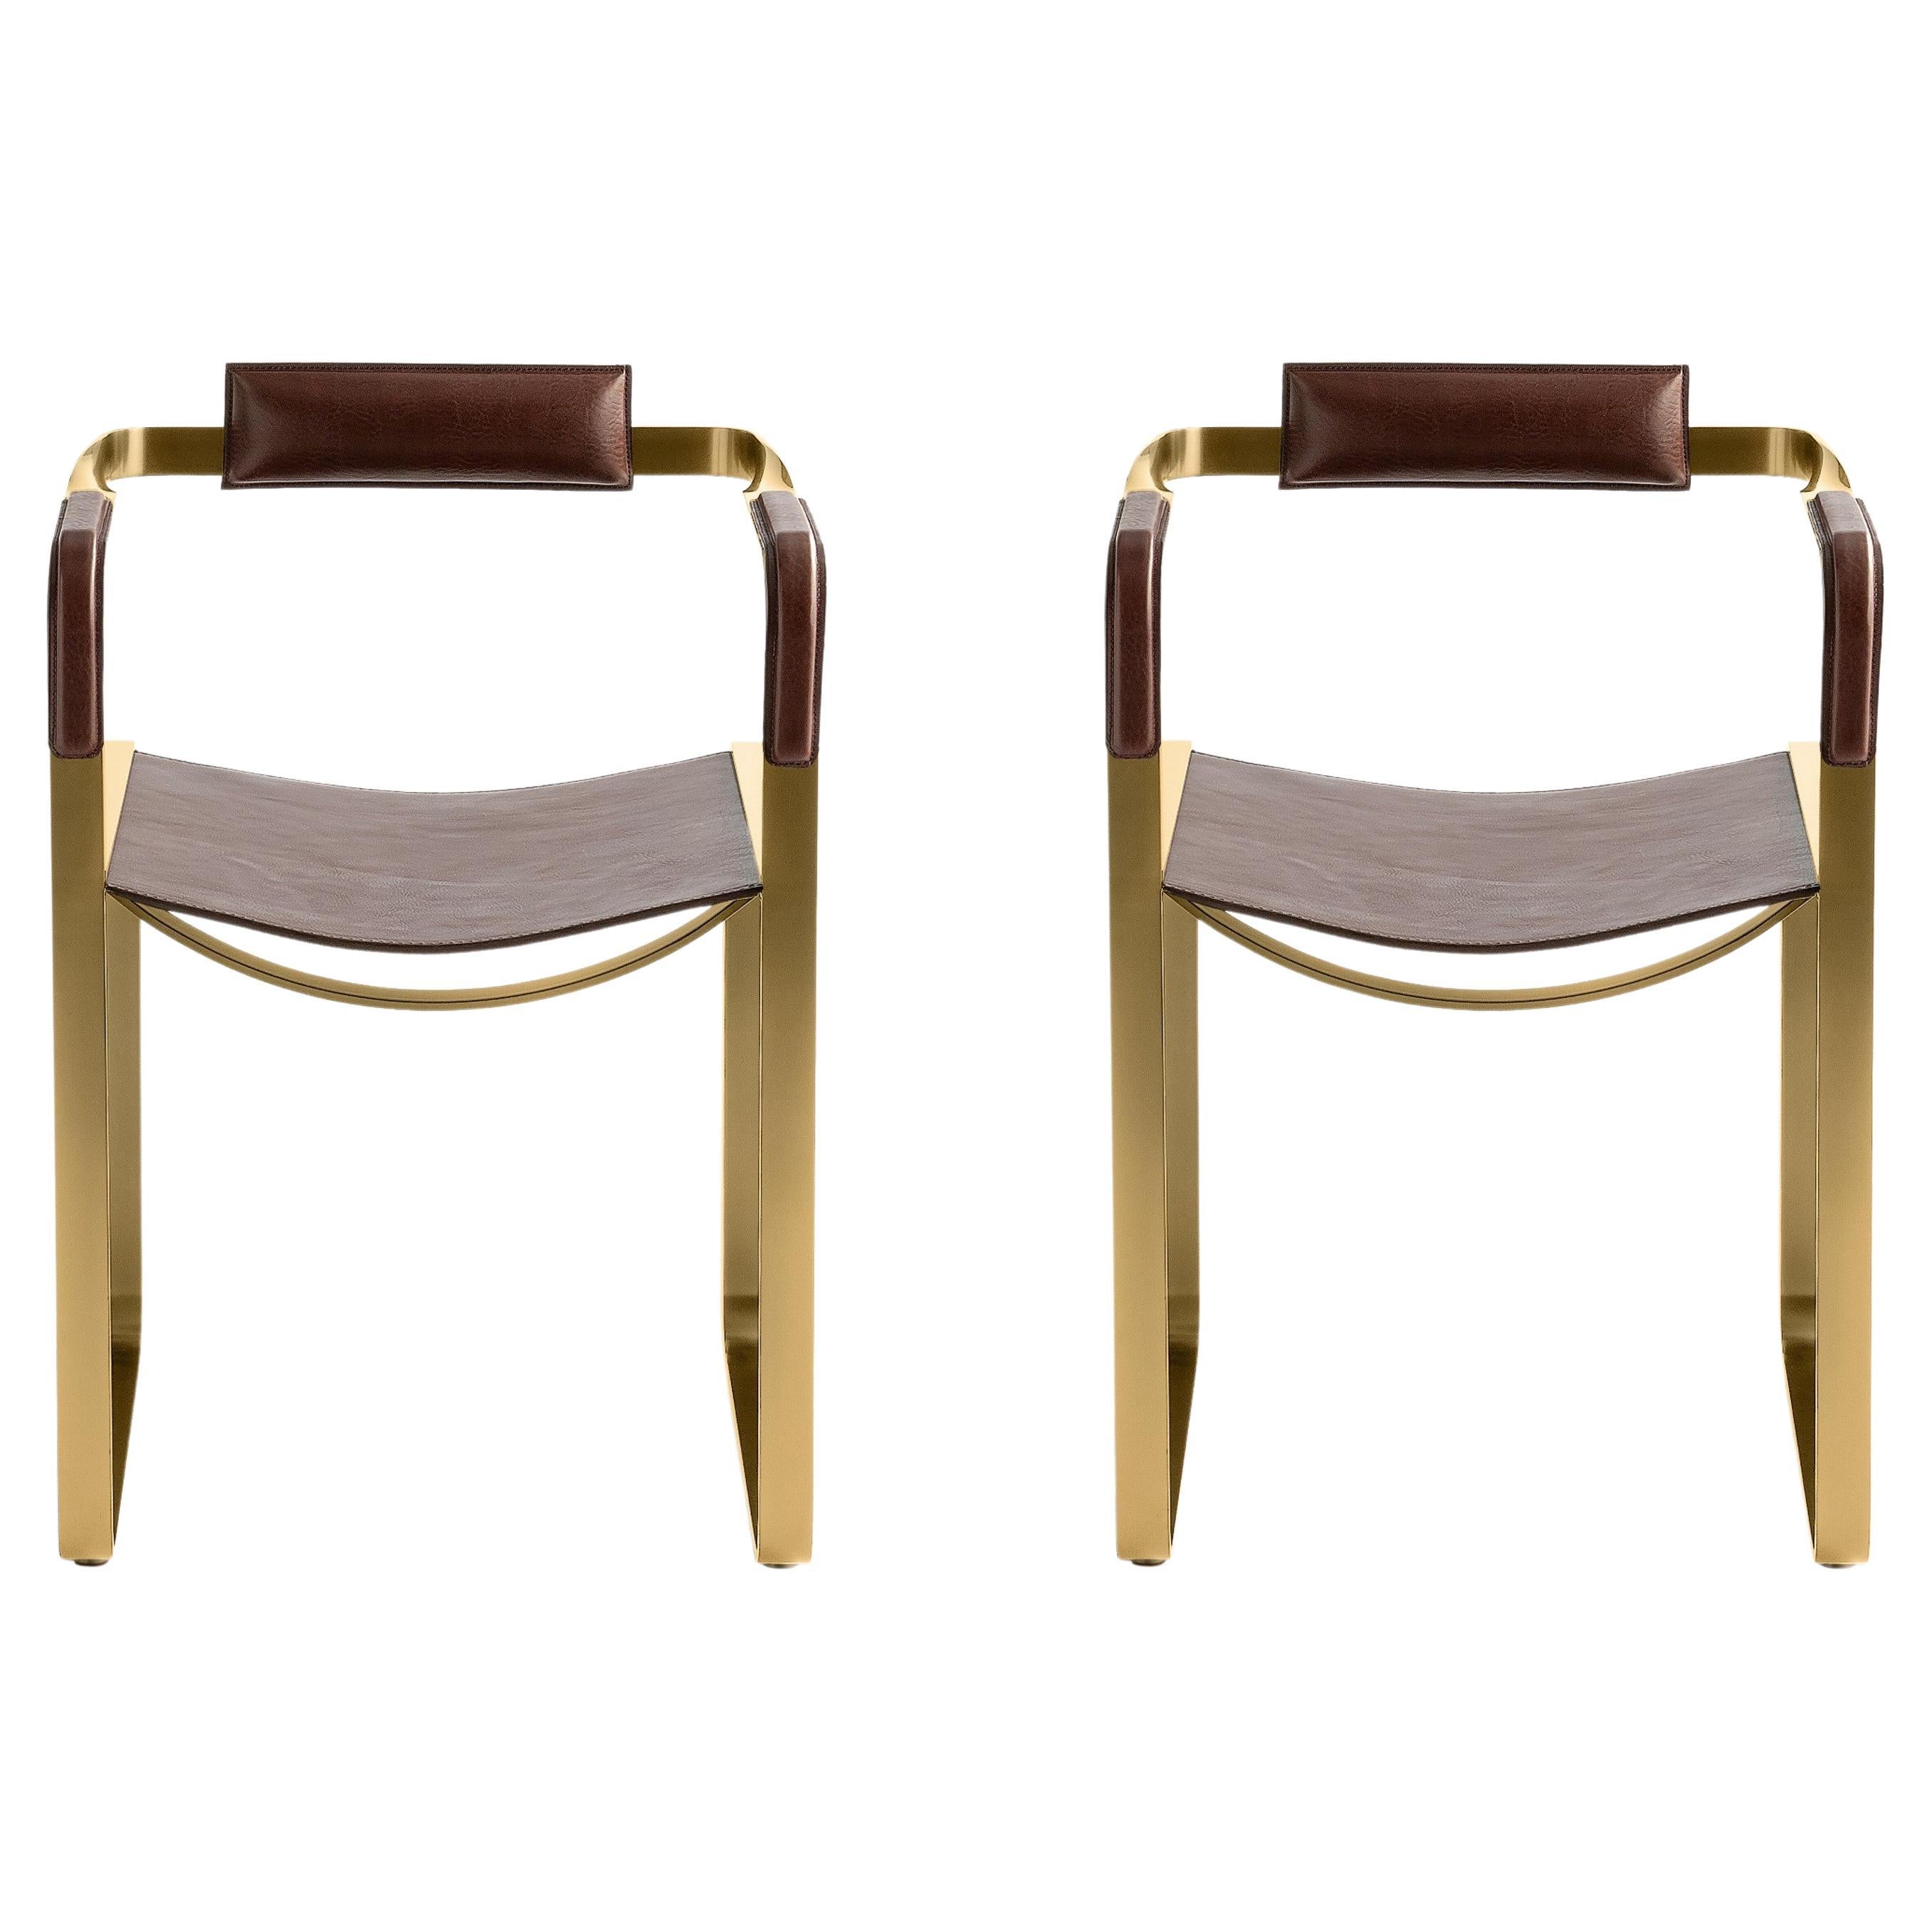 Set of 2 Armchair, Aged Brass Steel & Dark Brown Leather, Contemporary Style For Sale